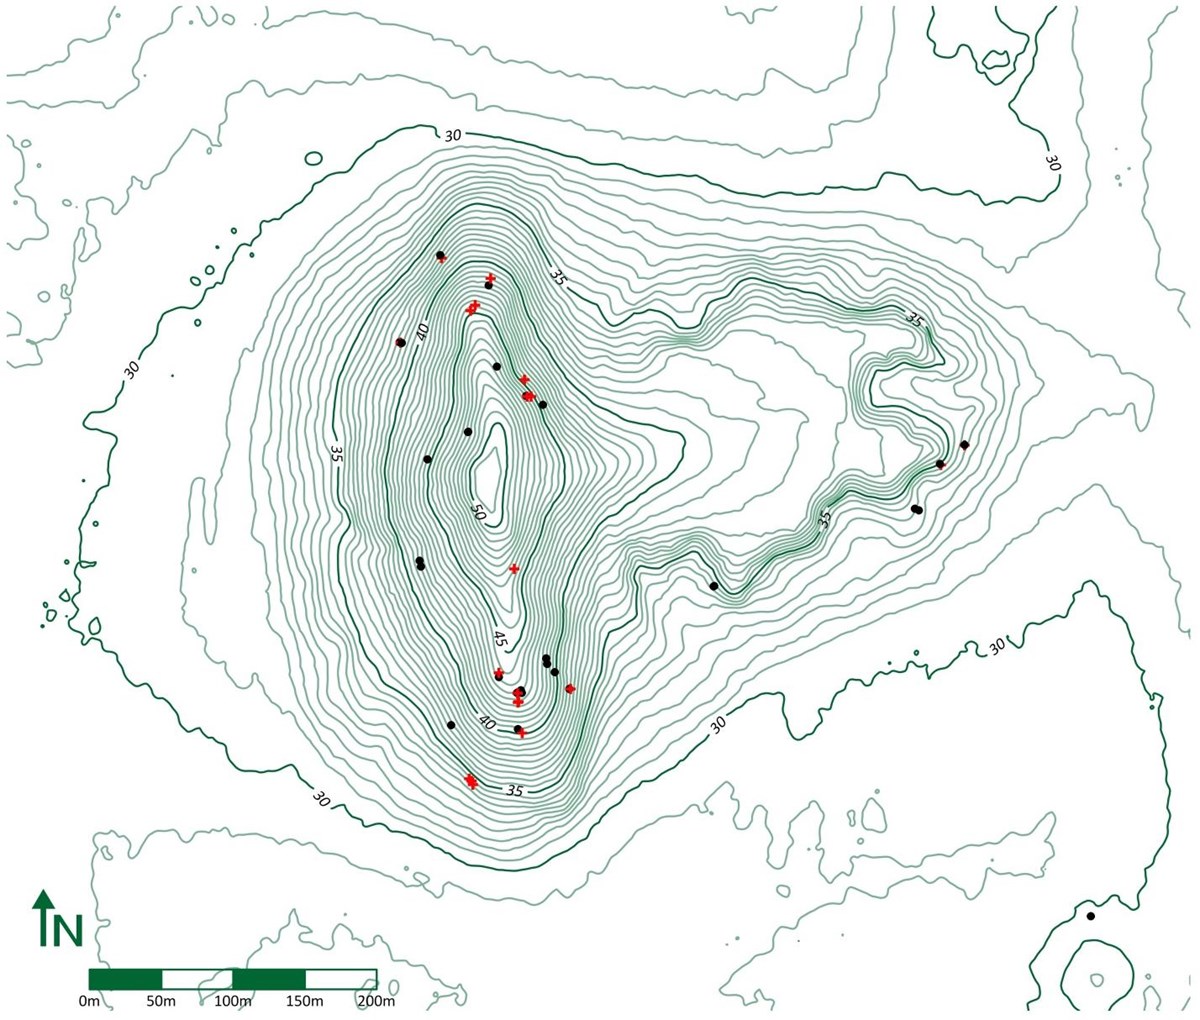 A scale topographical relief map of Mound A which shows locations of exposed roots classed by soil gain (+, red plus sign) and soil loss (*, black asterisk).